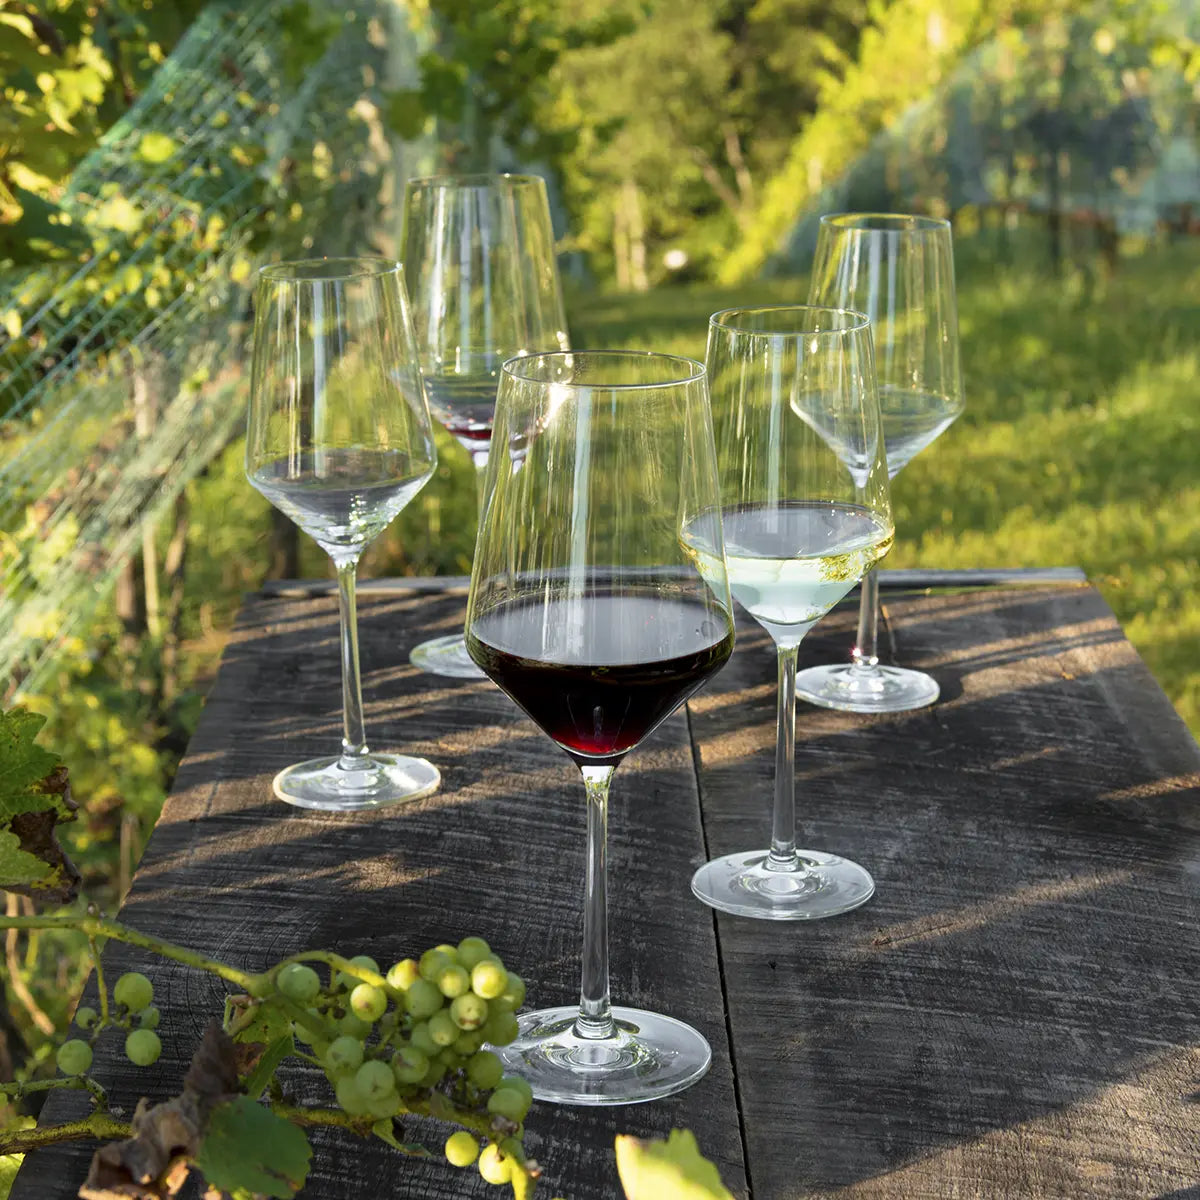 Five Filled Fortessa Tritan Pure Cabernet Glasses set on a wood table outdoors